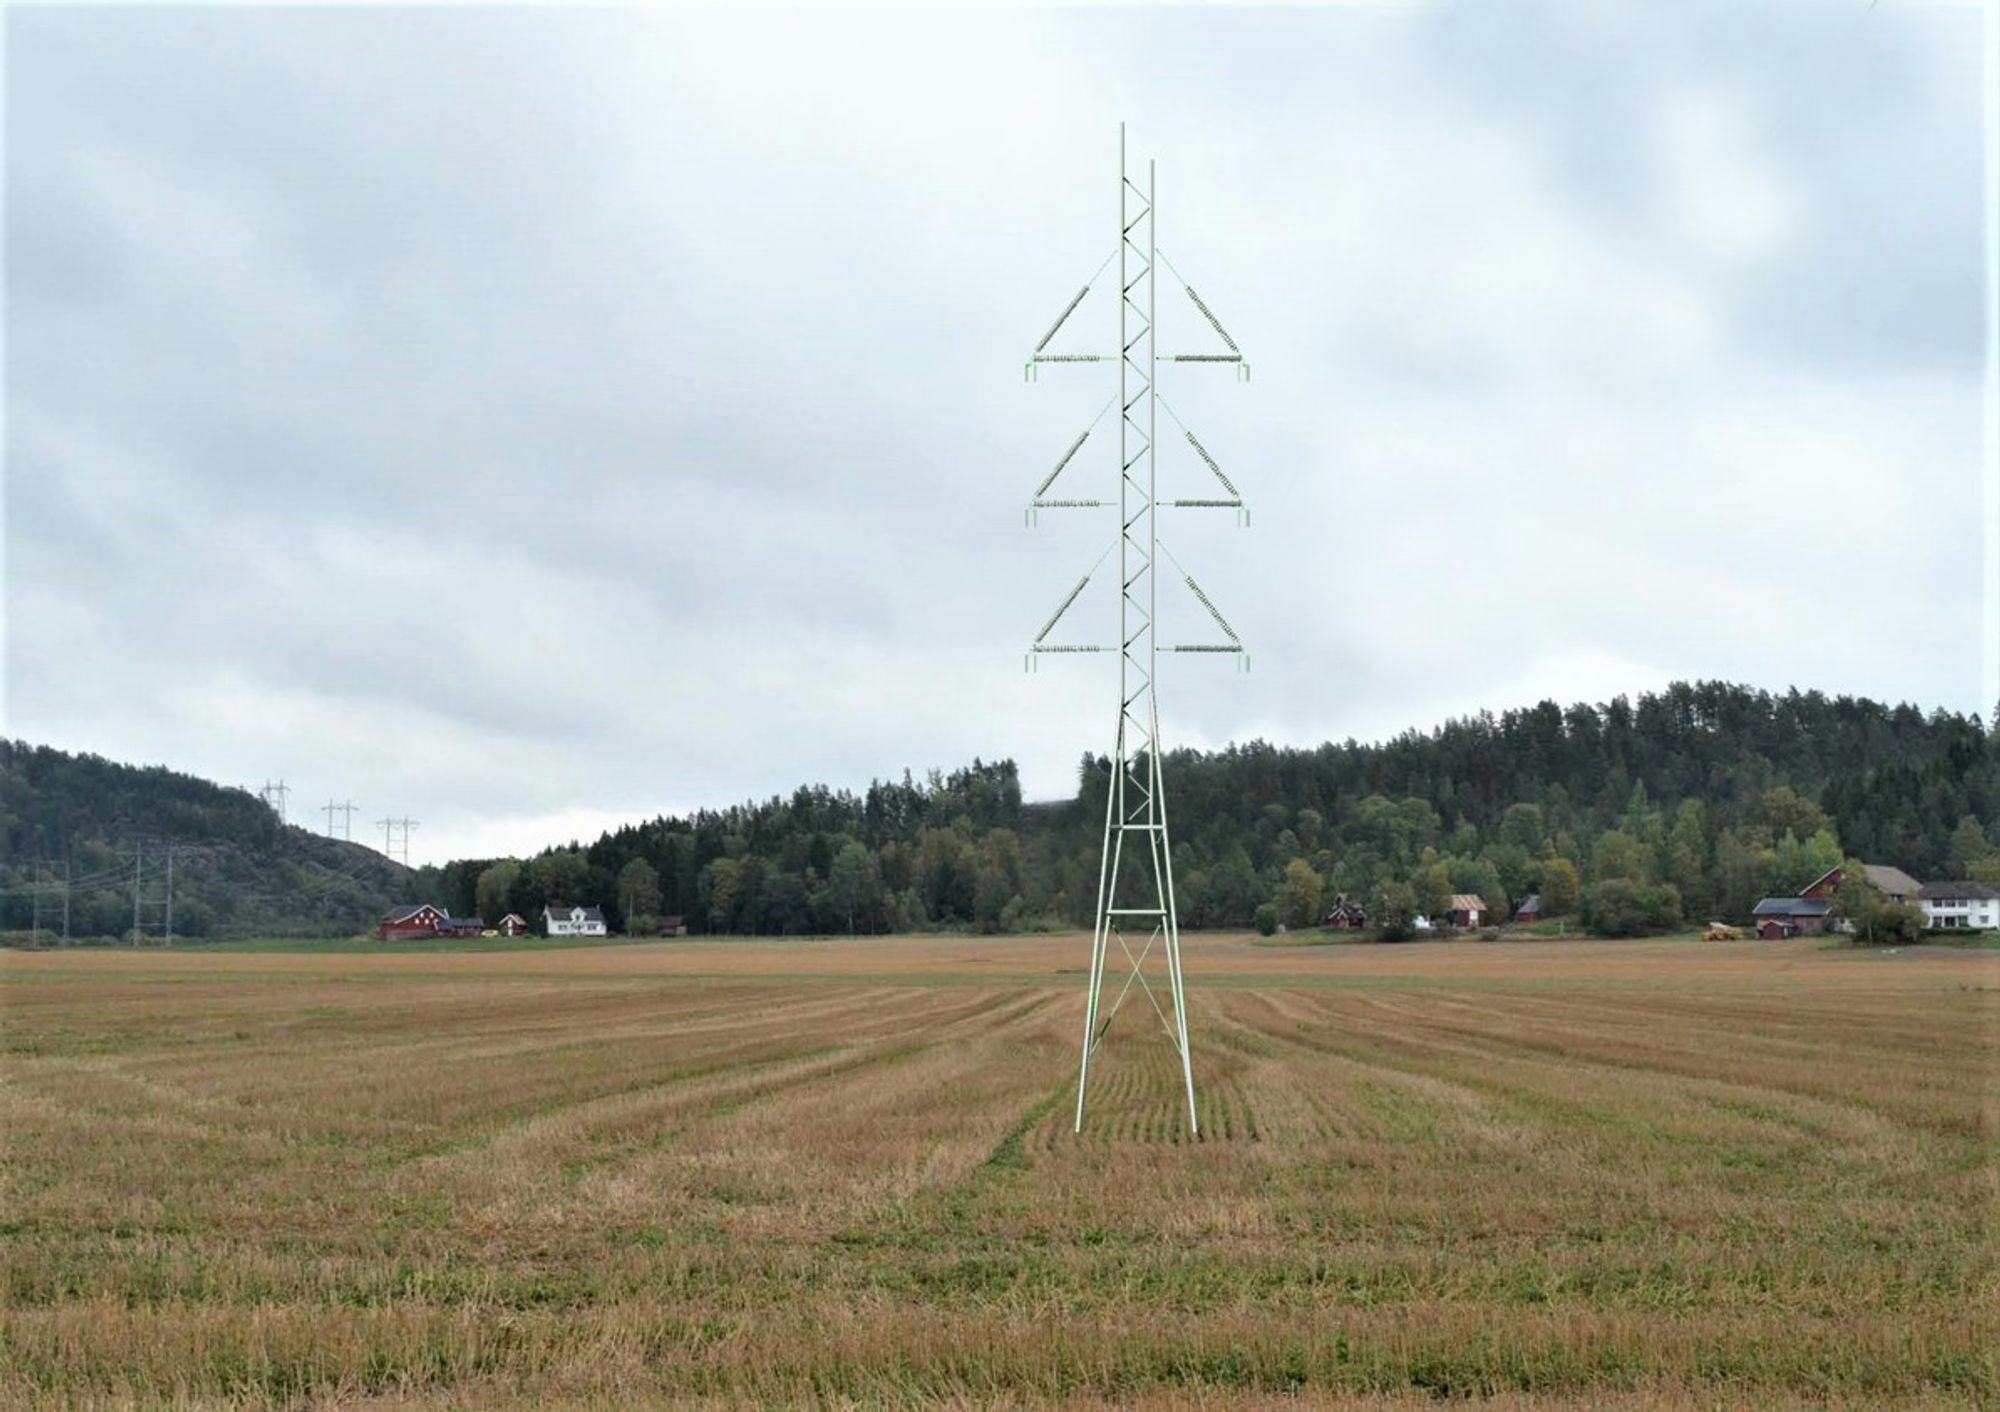 single pole transmission tower in the middle of a field (2)